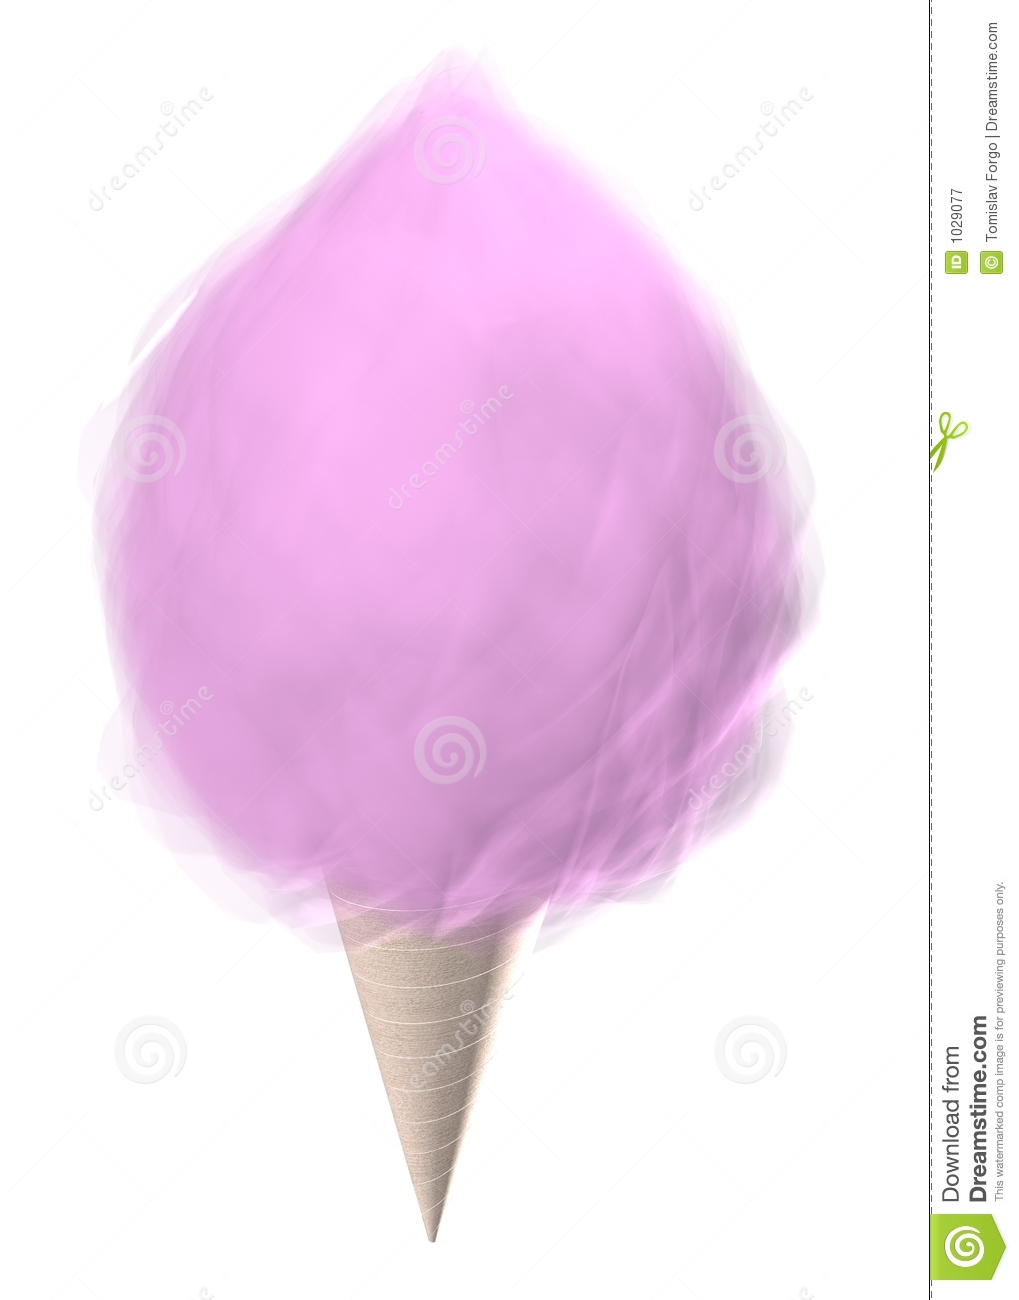 Pink Cotton Candy Royalty Free Stock Photography   Image  1029077